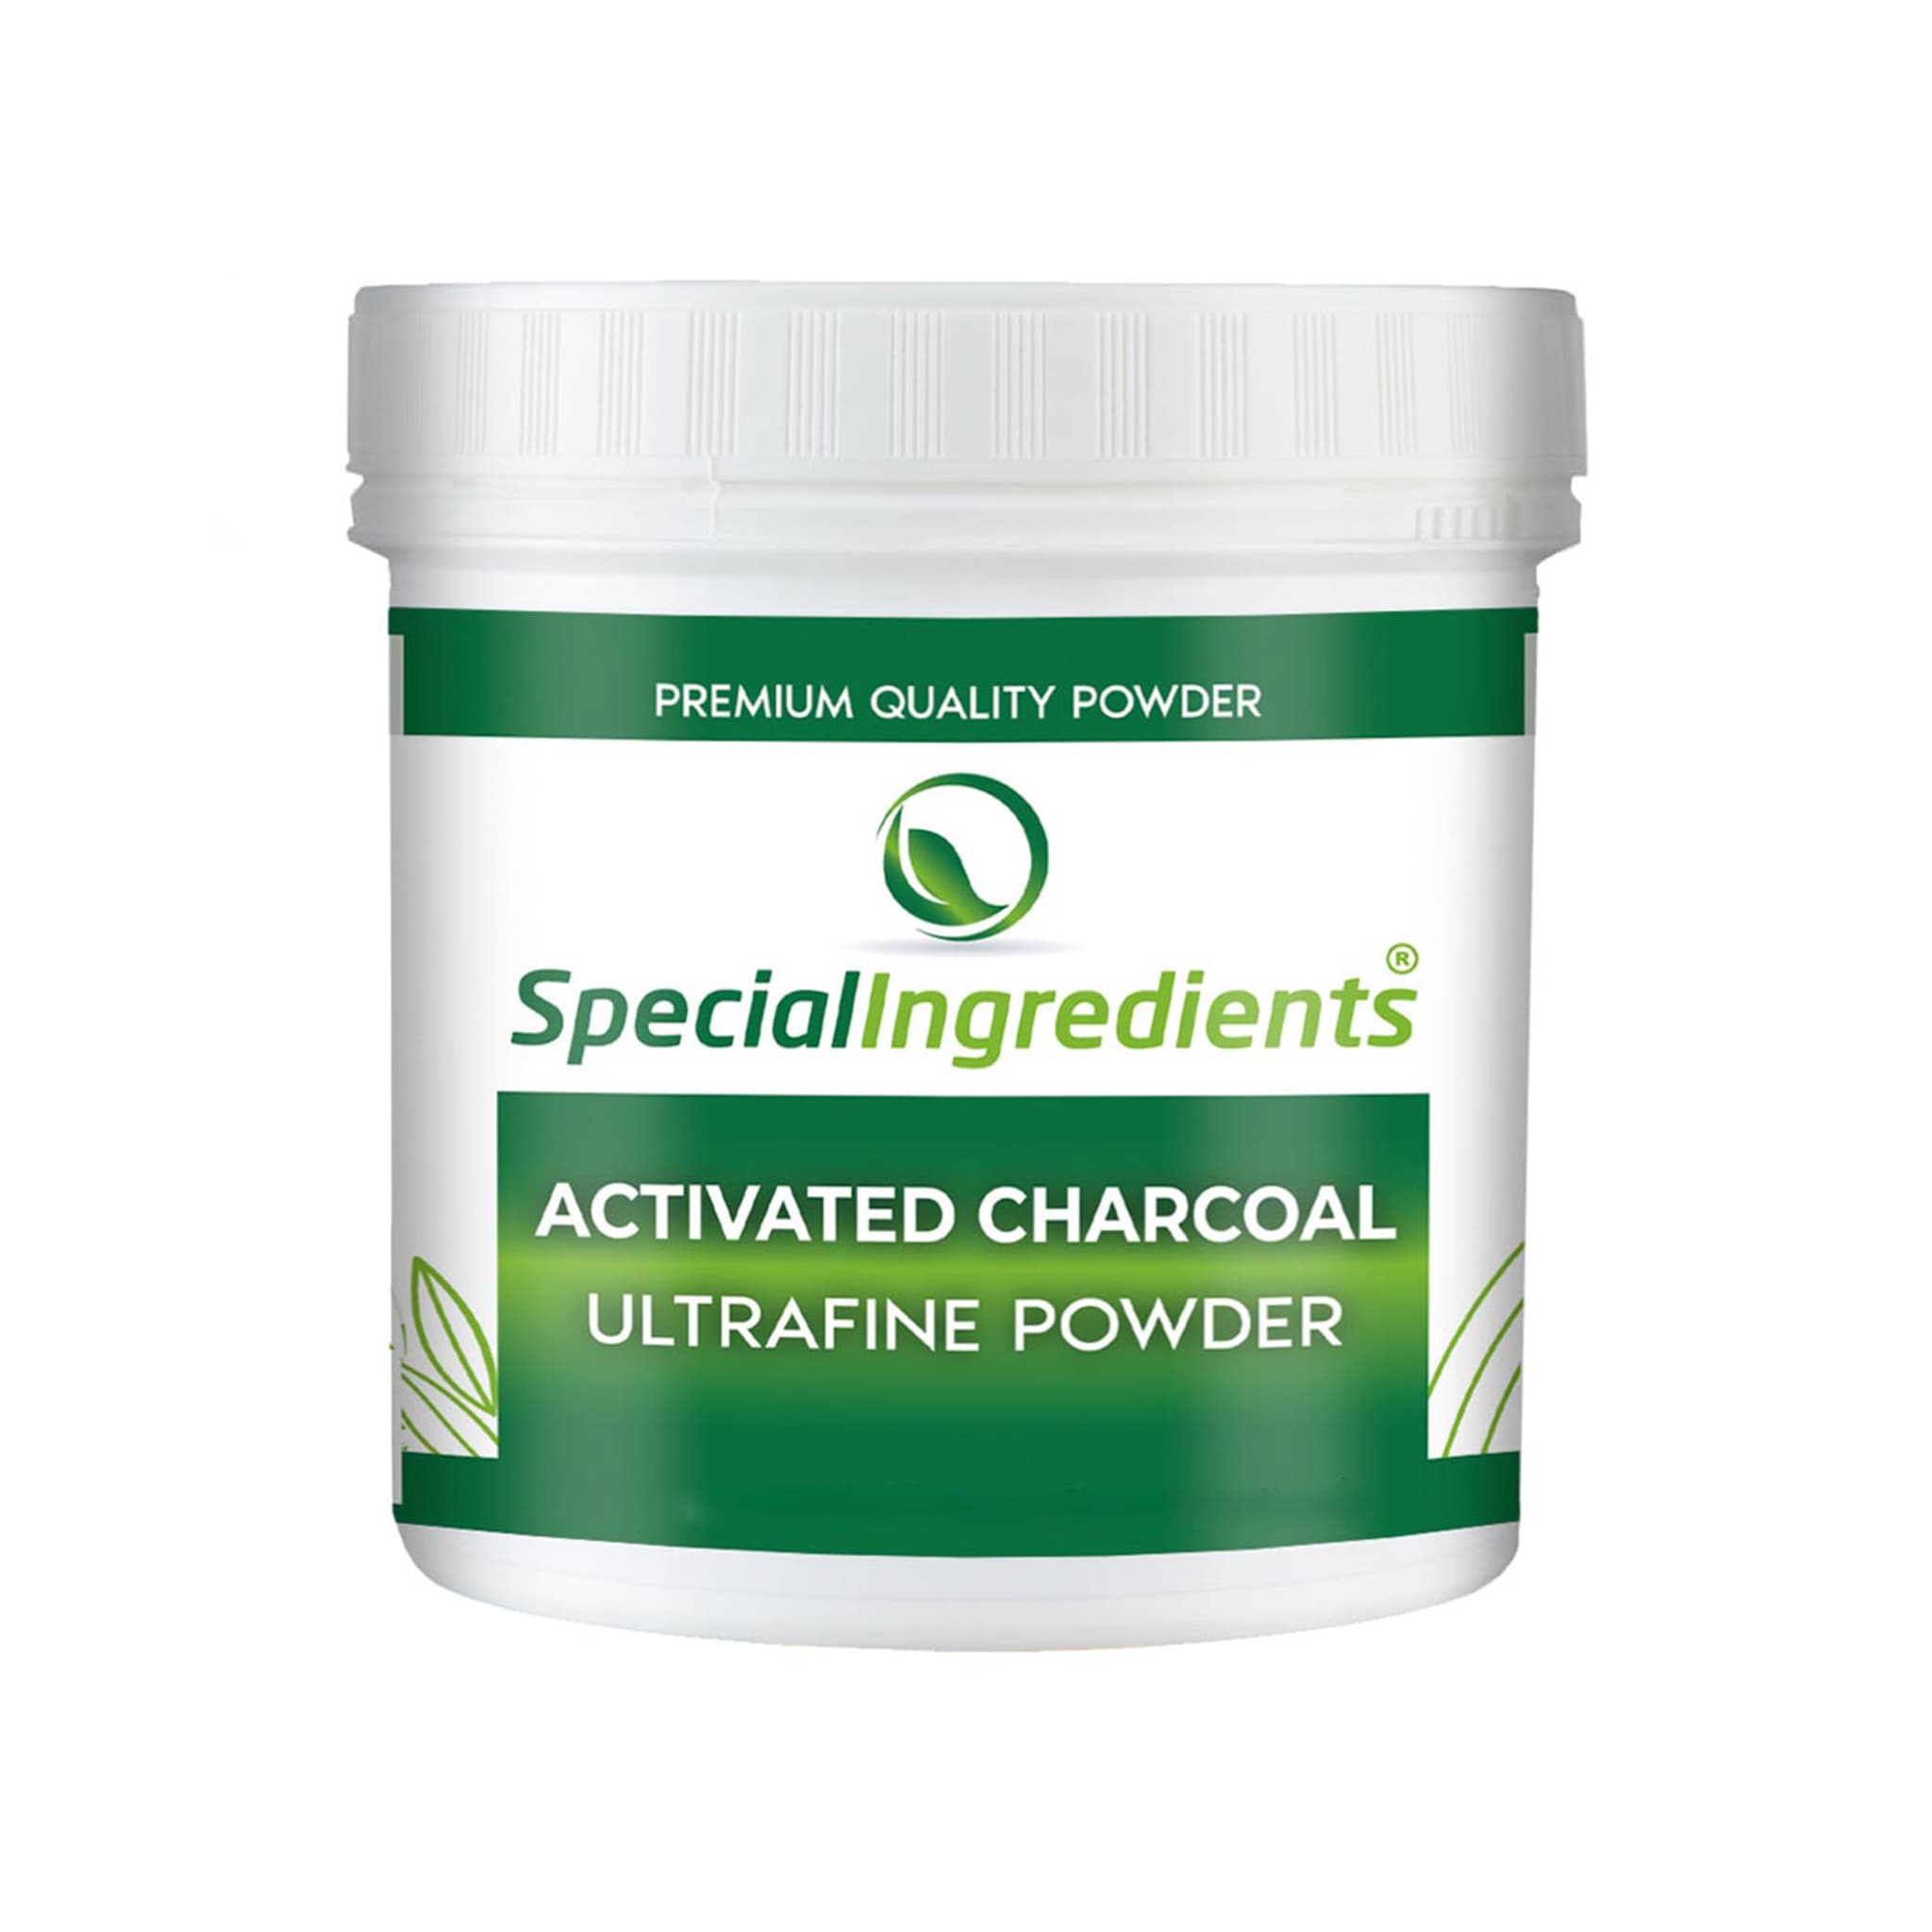 Activated Charcoal Powder 100g